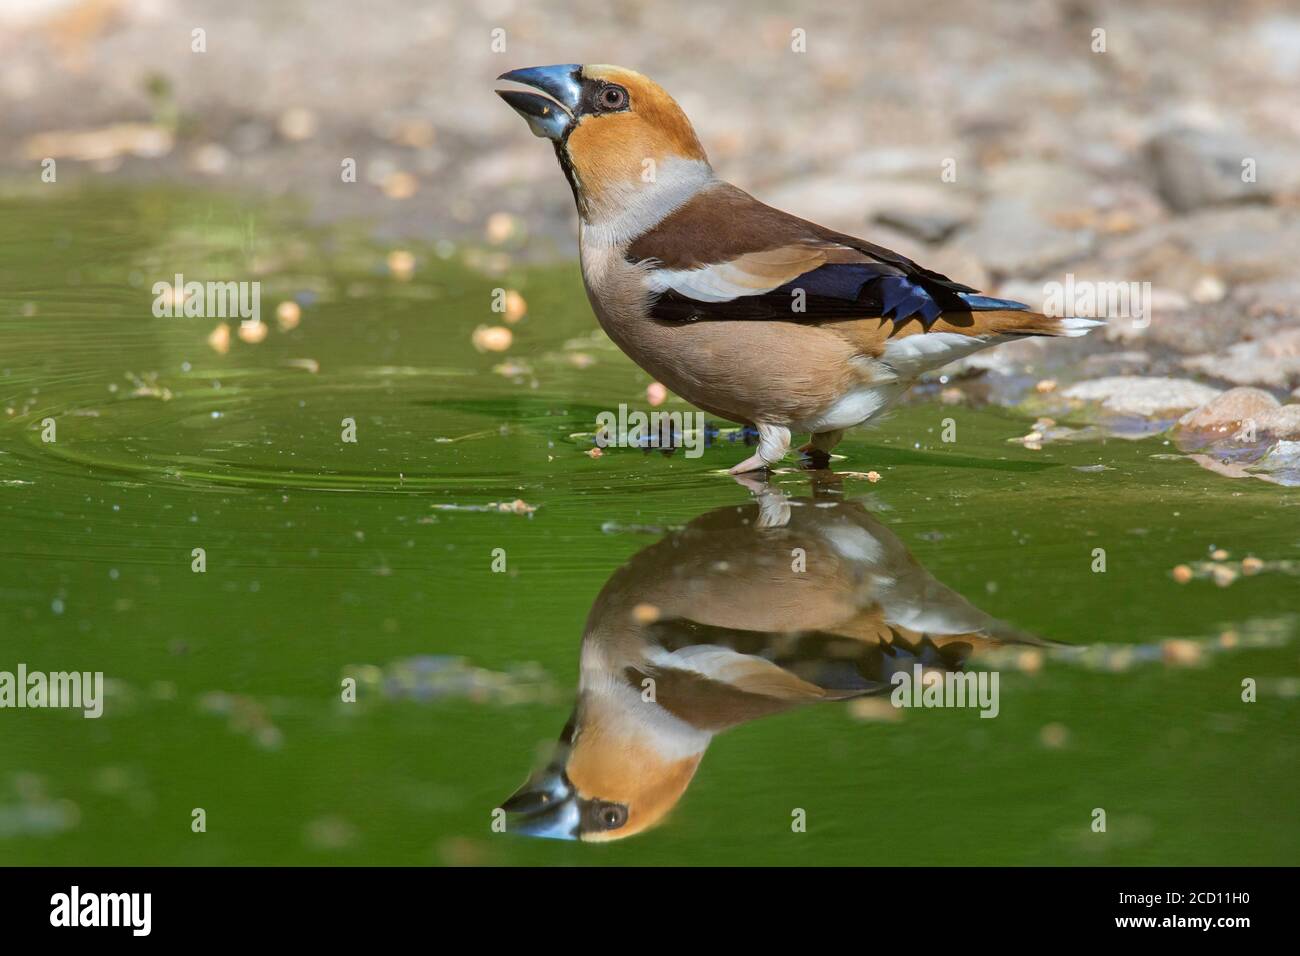 Hawfinch (Coccothraustes coccothraustes) male drinking water from puddle / pool / pond Stock Photo